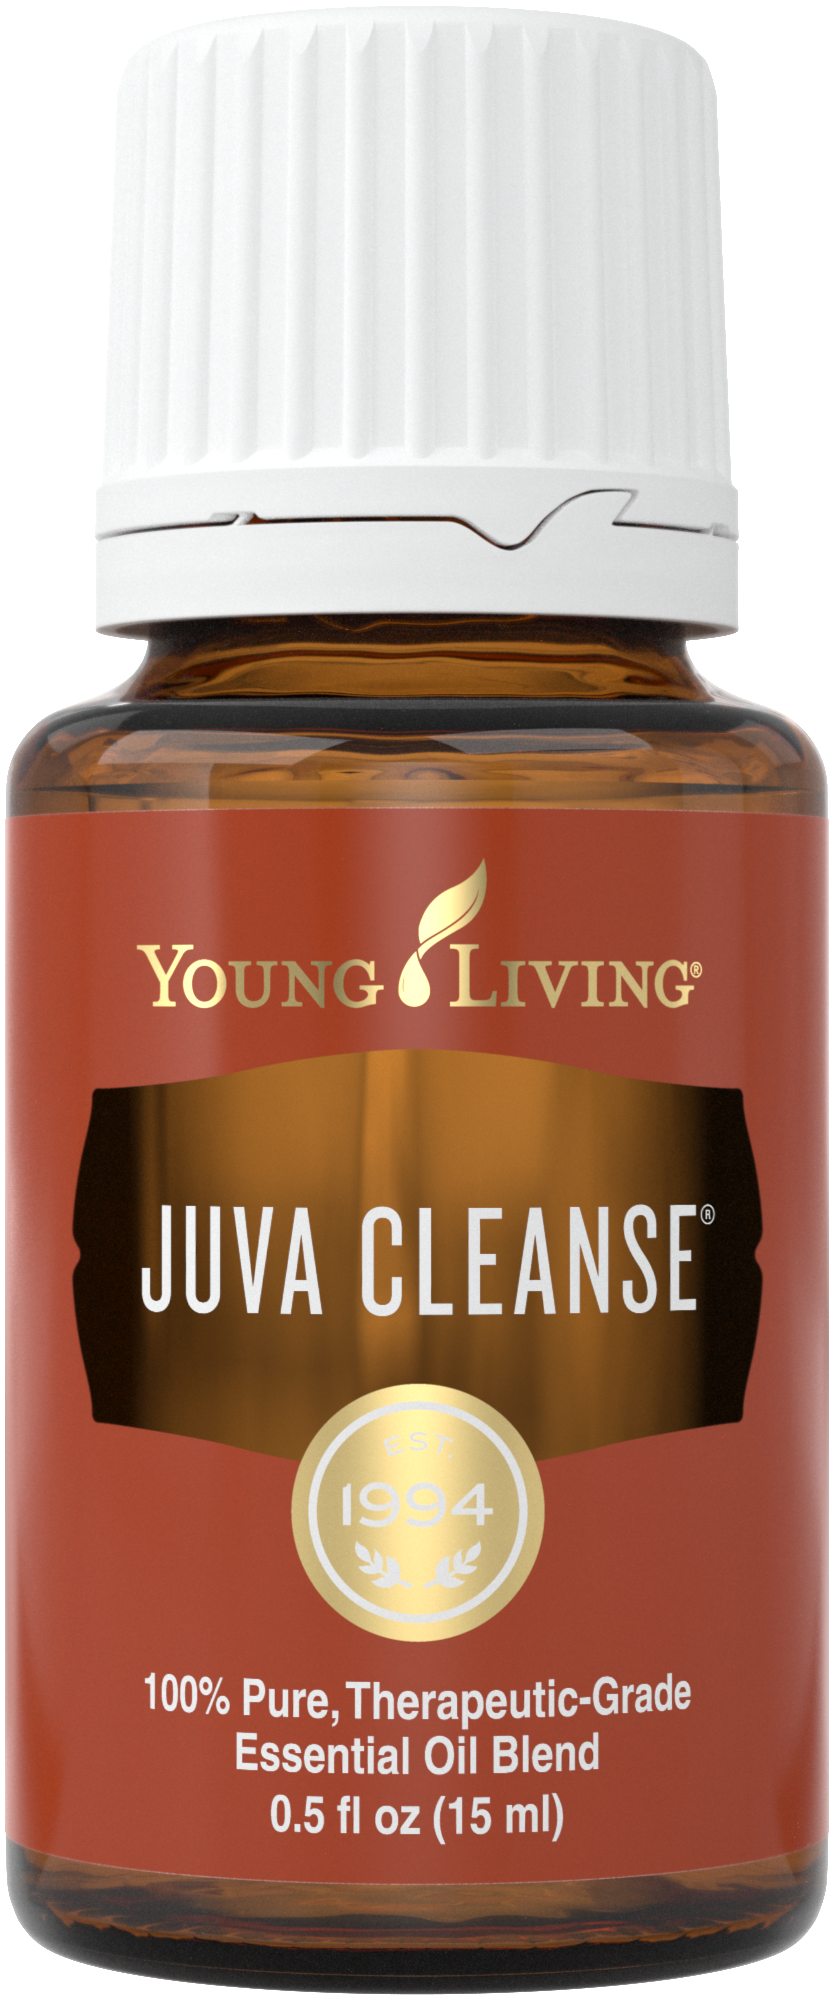 Juva Cleanse 15ml Silo.png